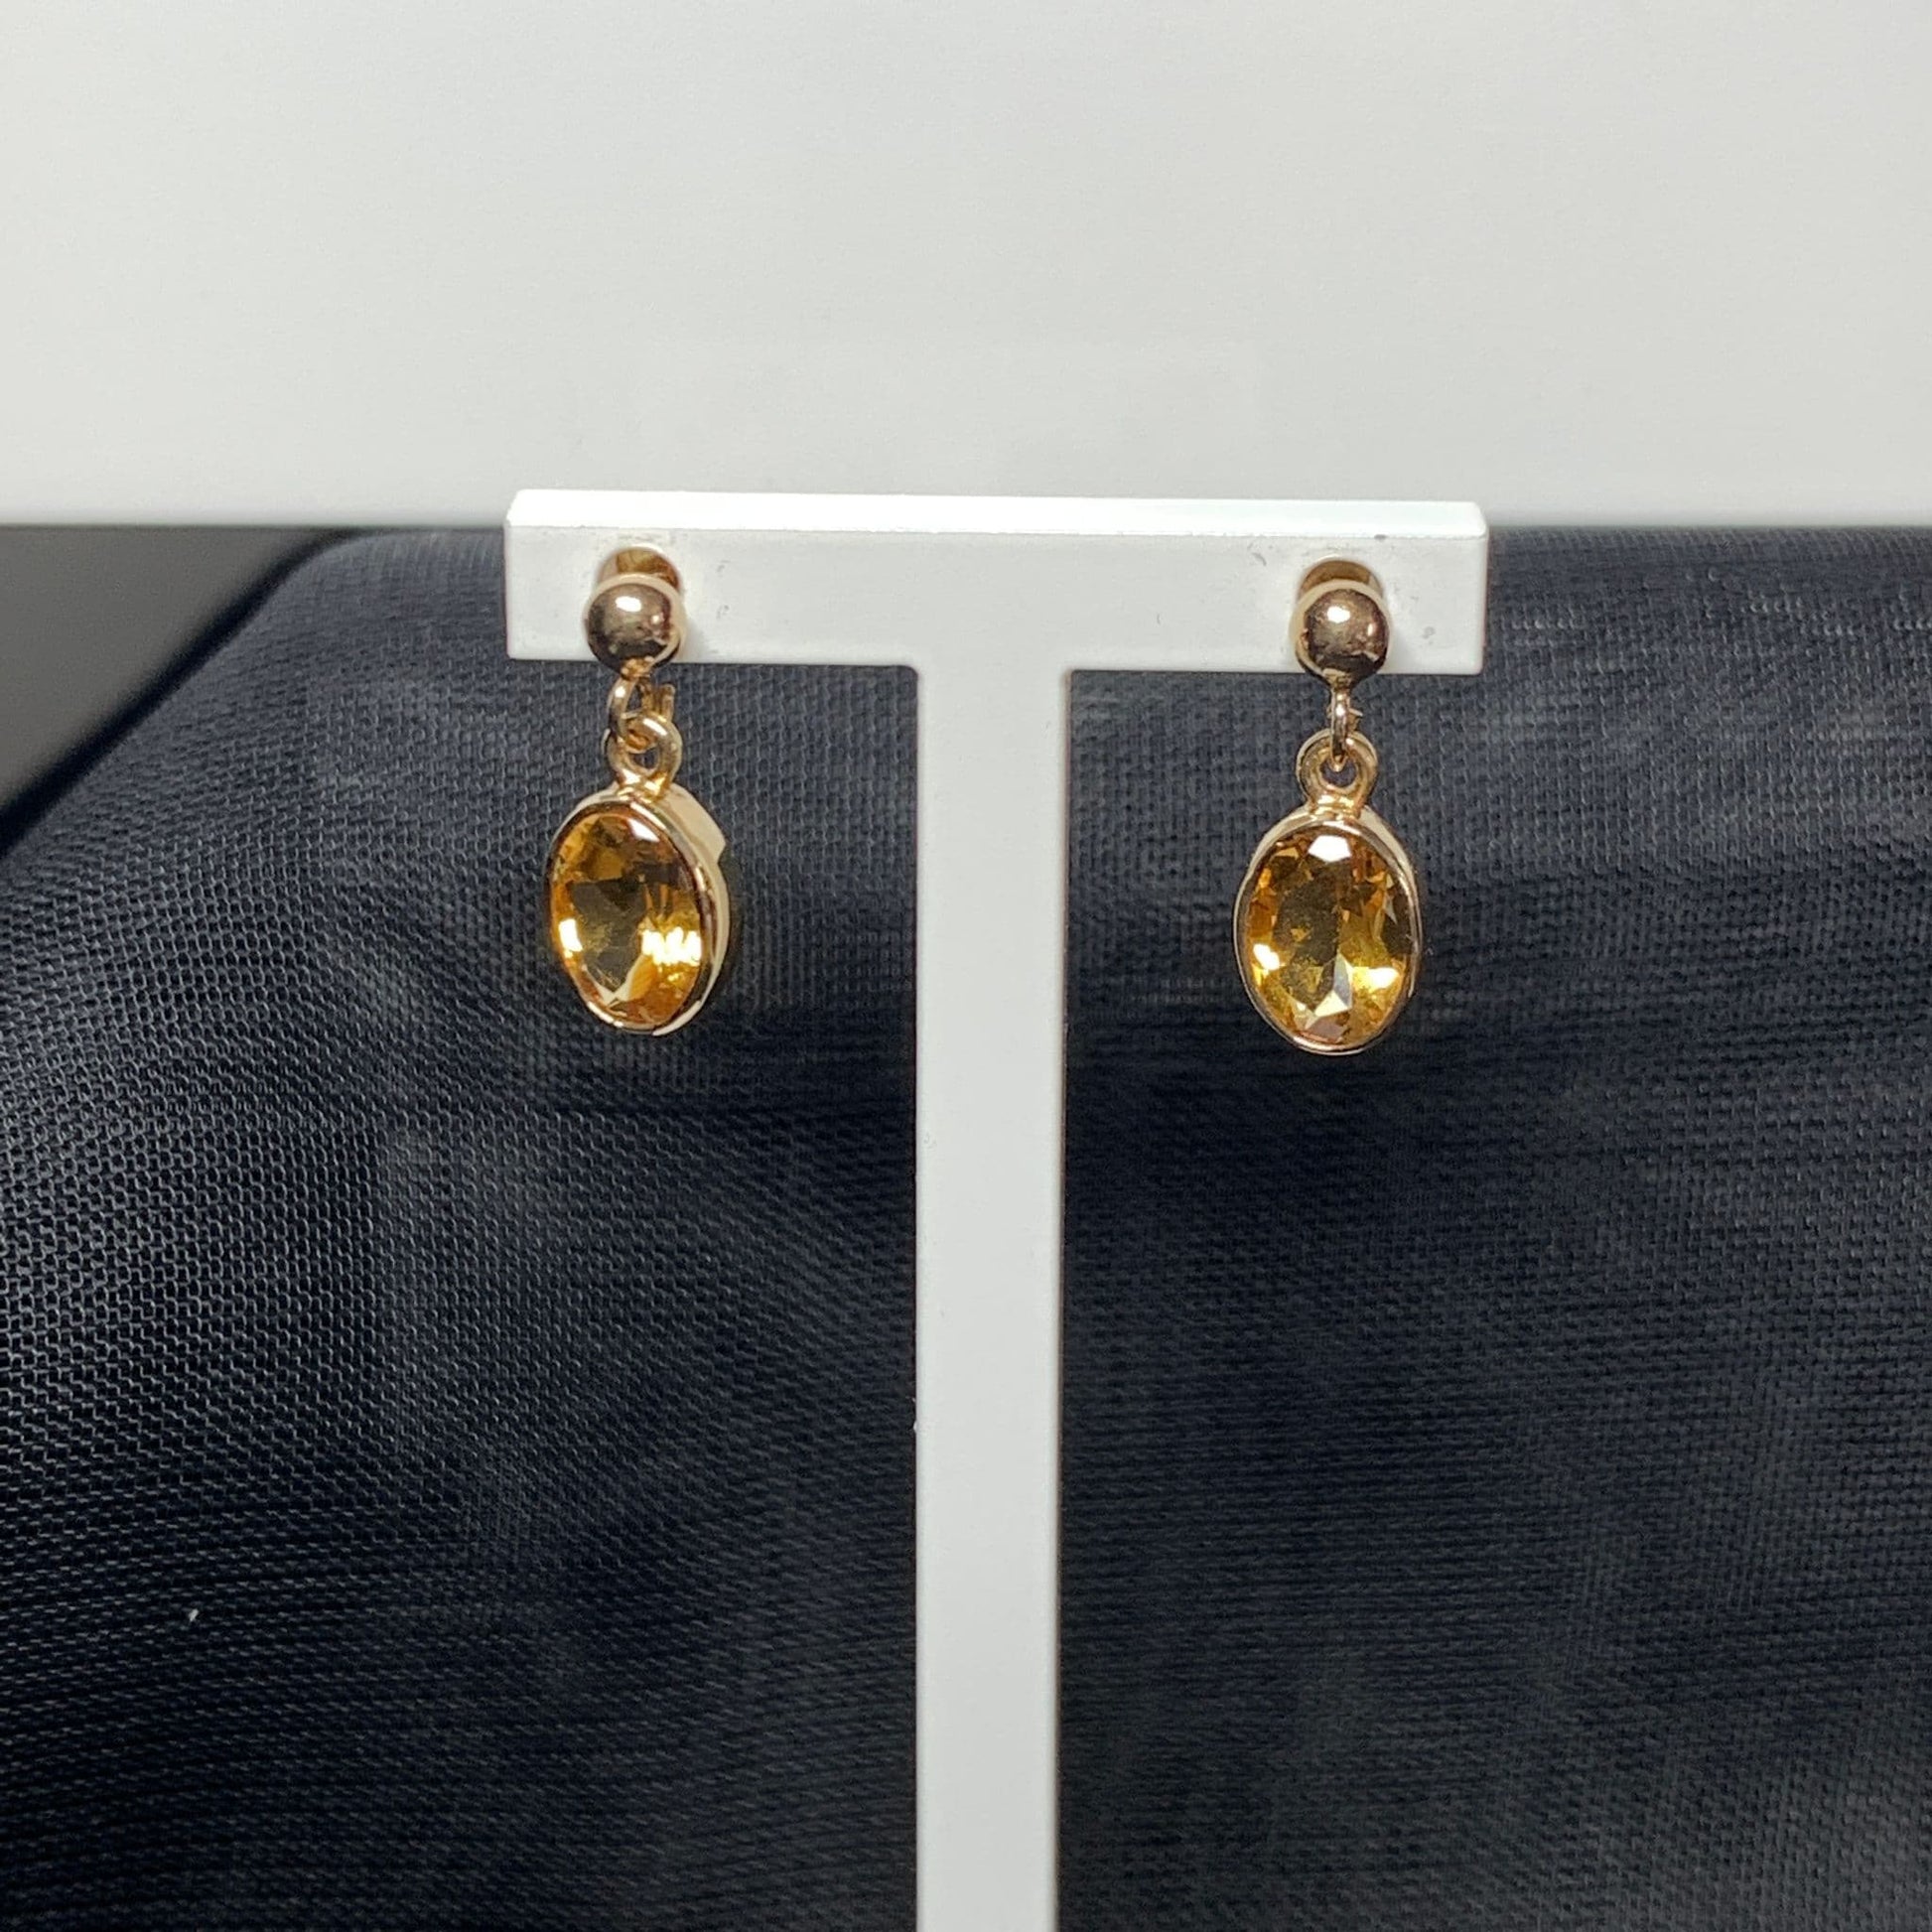 Oval yellow citrine gold drop earrings